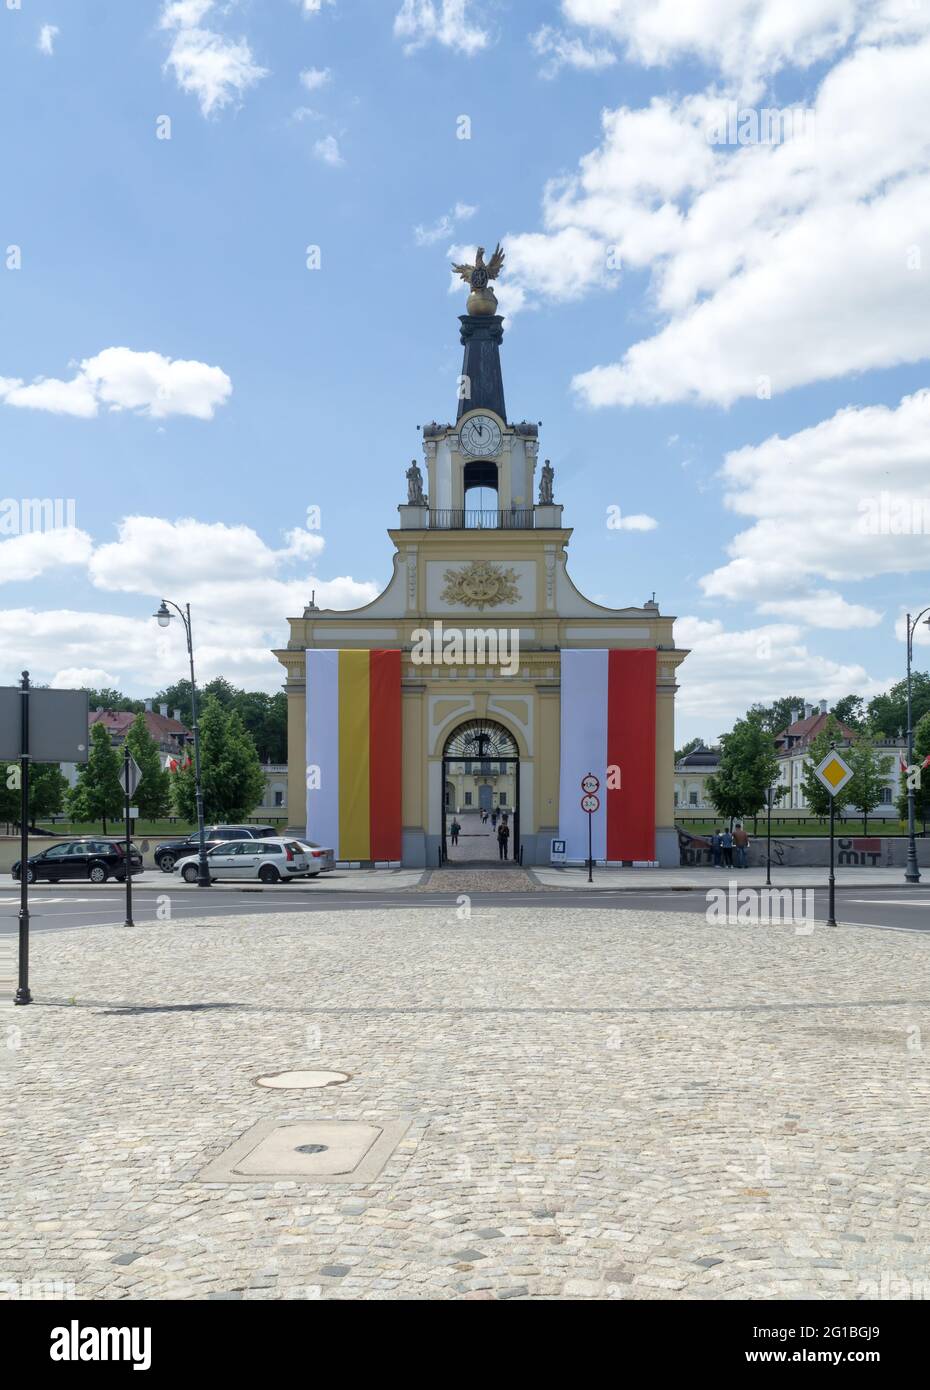 BIALYSTOK, POLAND - June 03, 2021: Gate of the Griffin of the Branicki Palace, the main gate decorated with flags of Poland and Białystok, Europe Stock Photo